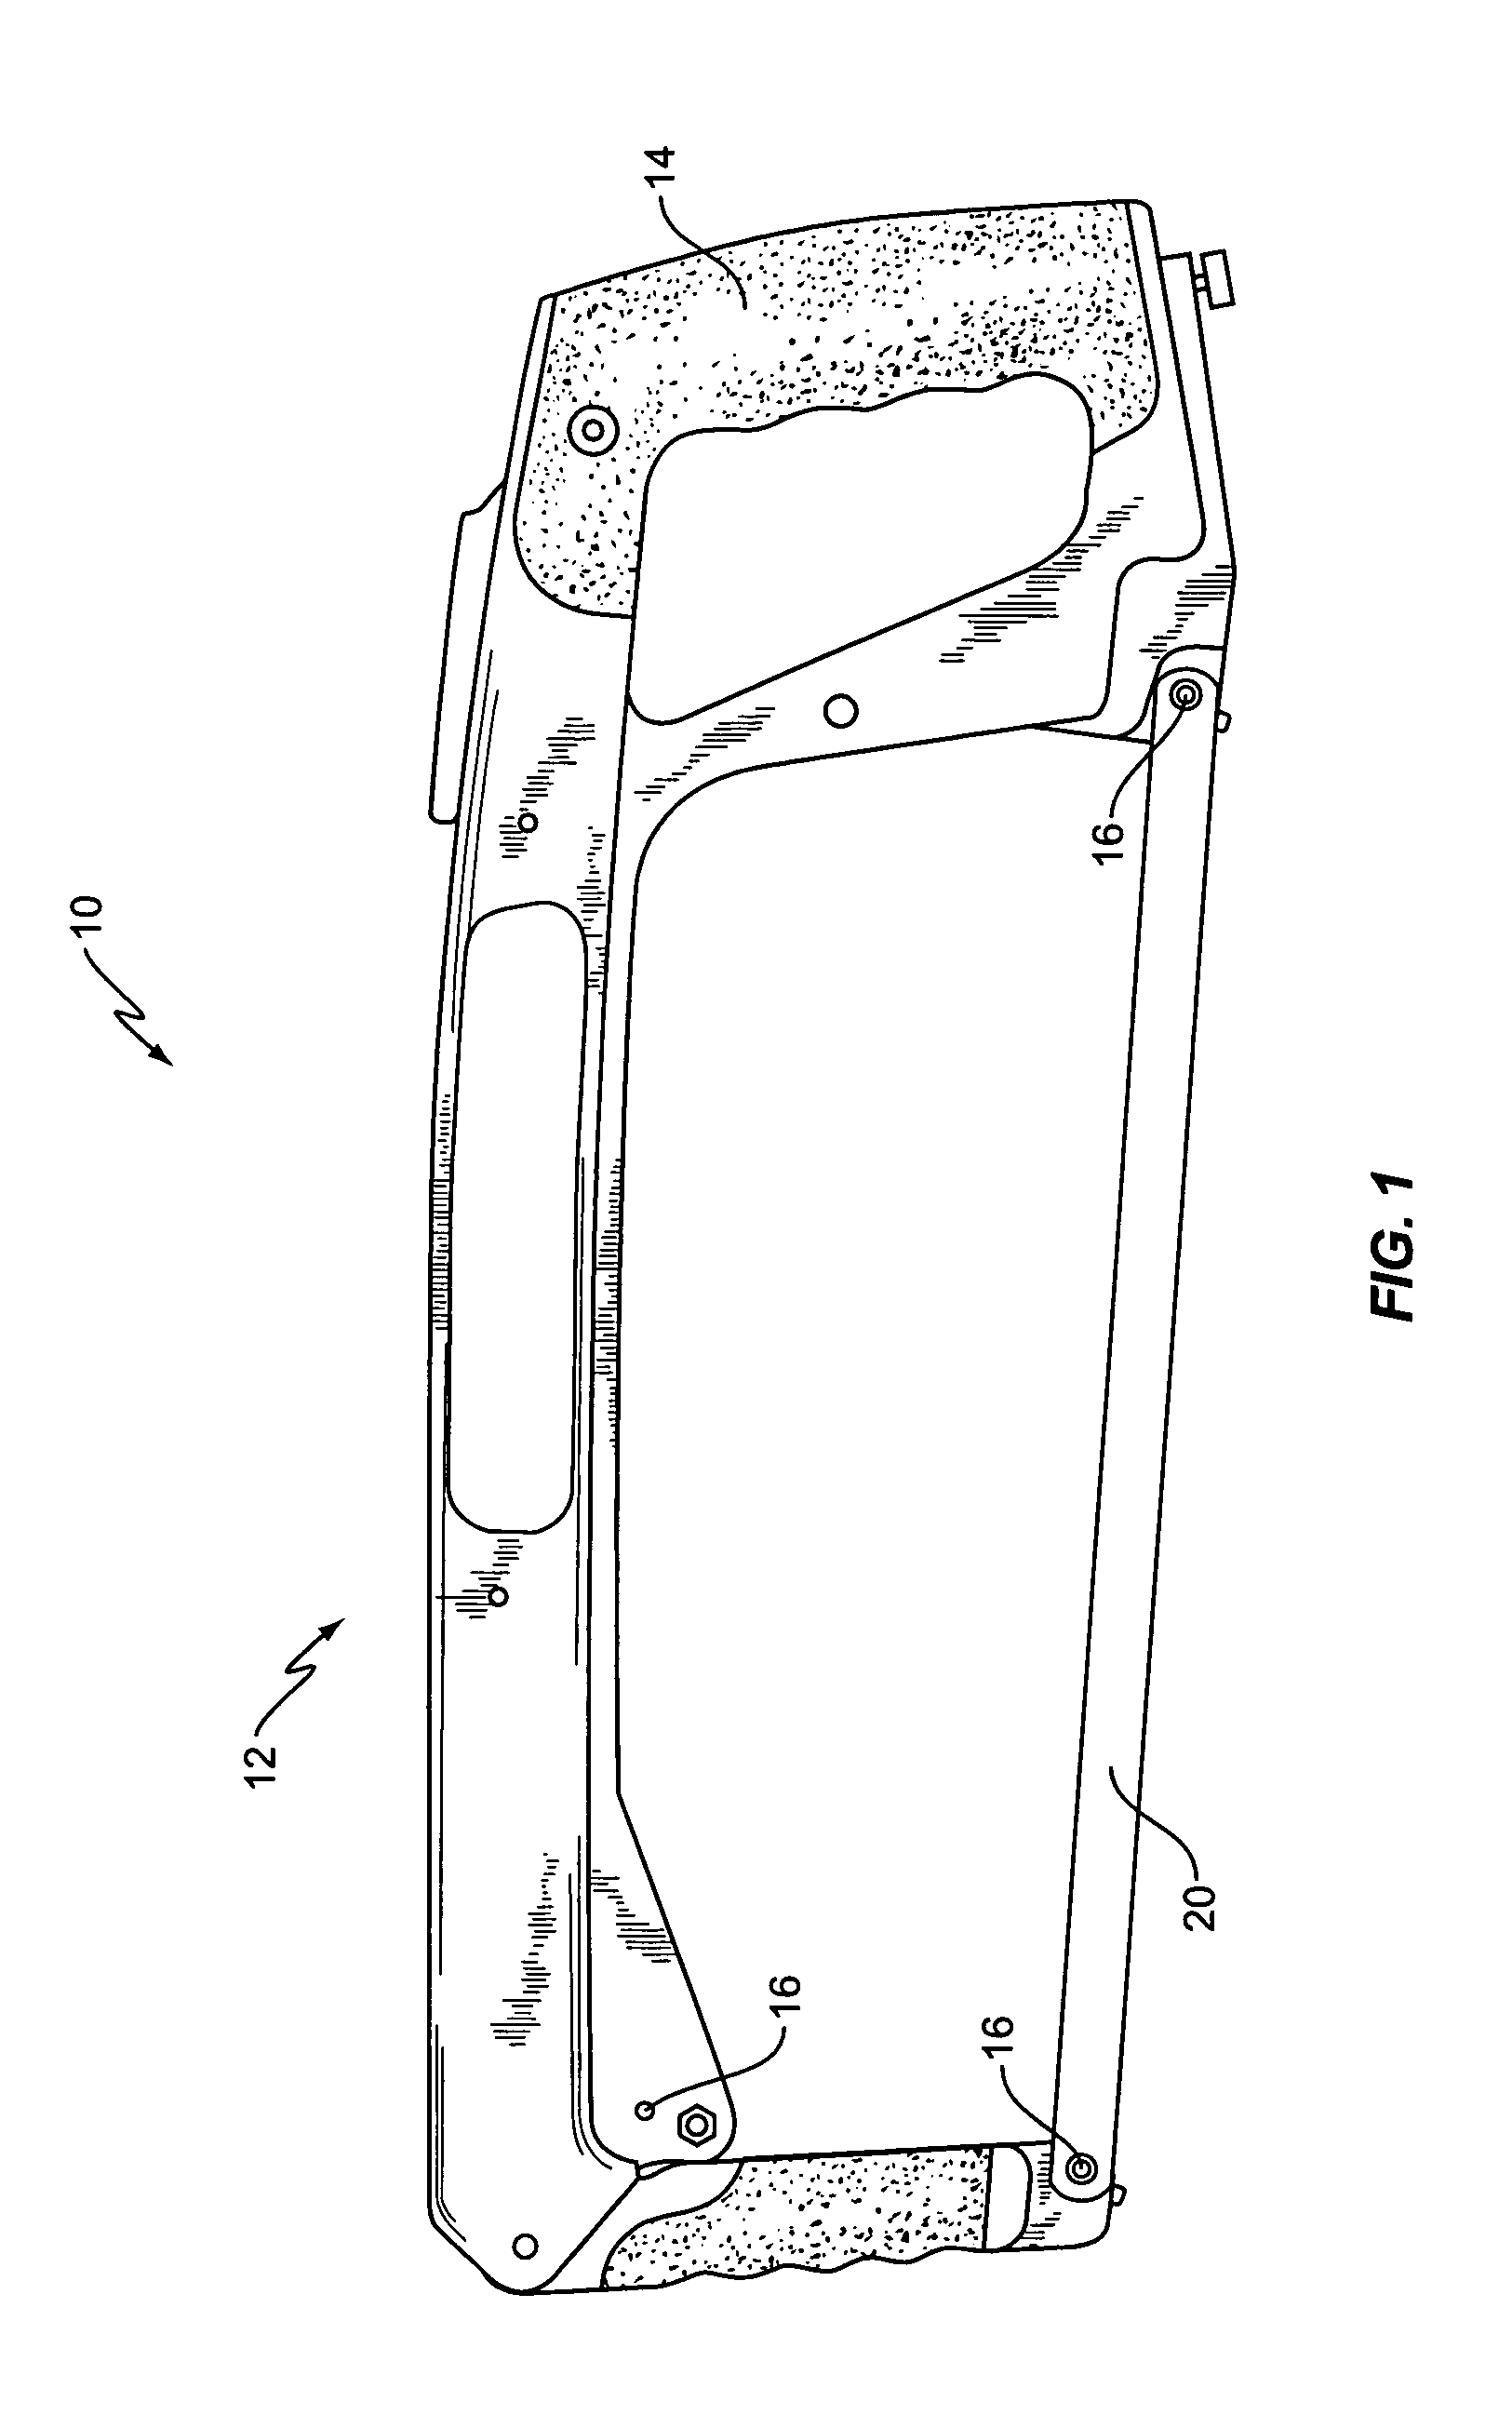 Hand tool with cutting blade having cutting surfaces with wear-enhancing coating thereon